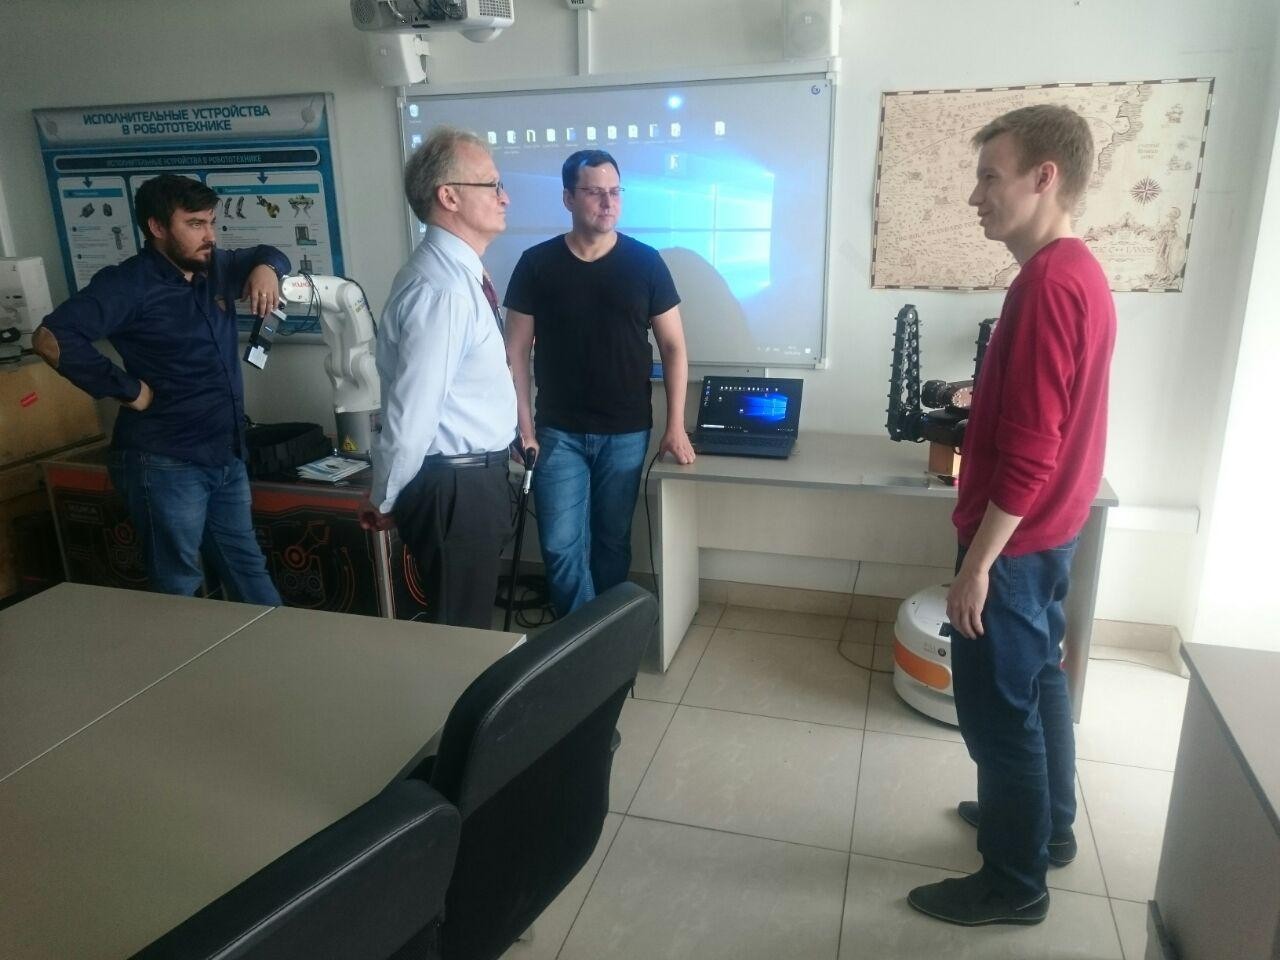 Professor from Germany visited the Laboratory of Intelligent Robotic Systems. ,ITIS Higher Institute, KFU, Intelligent Robotics Department, Laboratory of Intelligent Robotic Systems, Cooperation